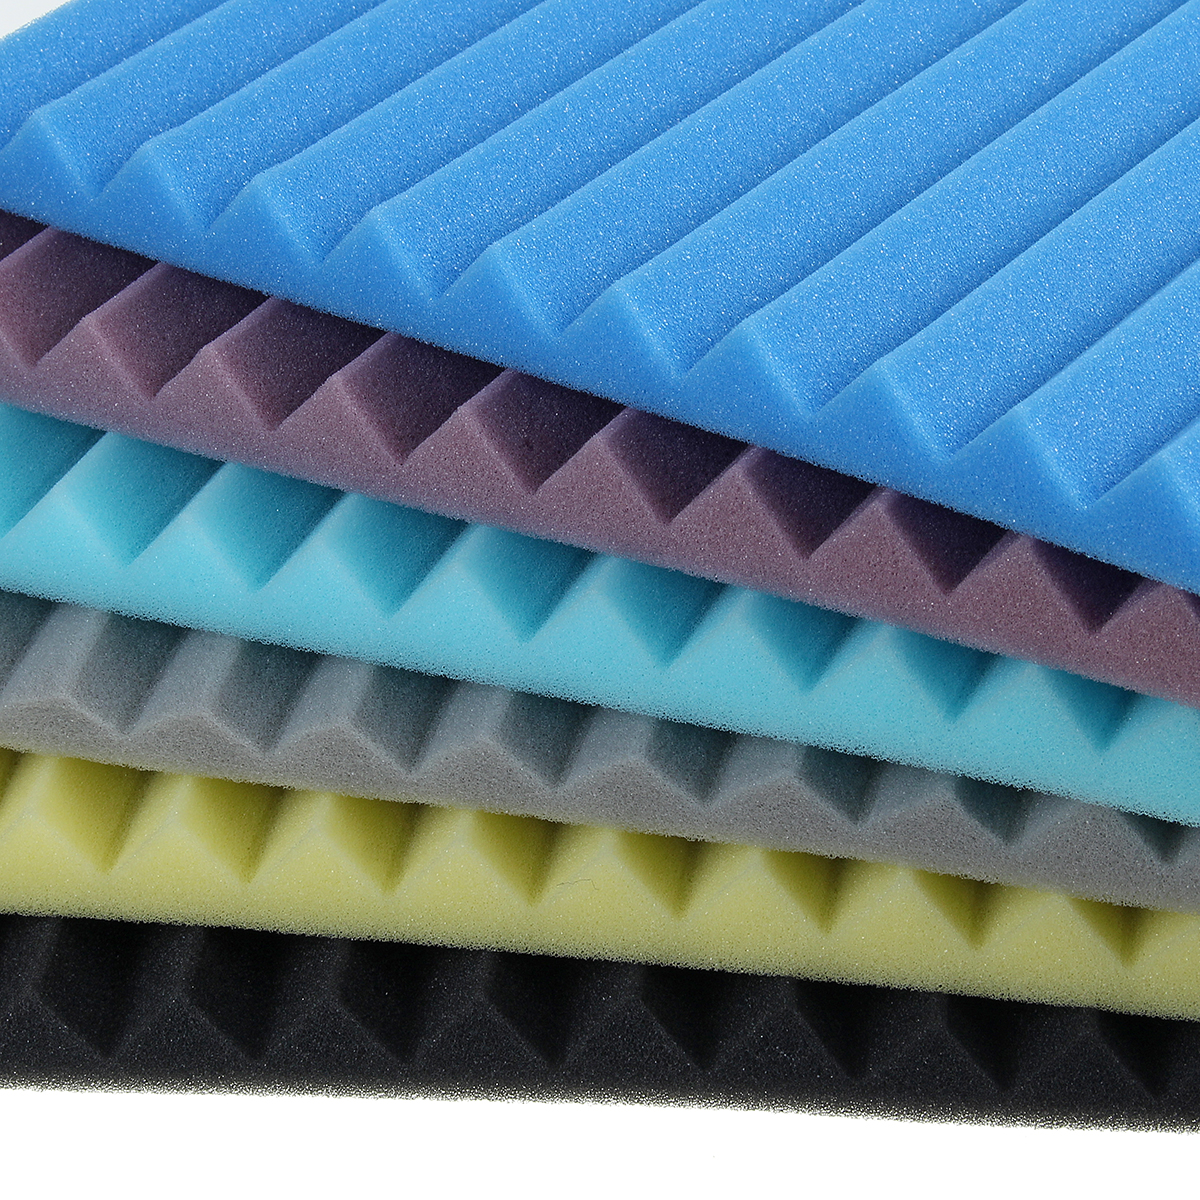 18-Pcs-Soundproofing-Wedges-Acoustic-Panels-Tiles-Insulation-Closed-Cell-Foams-1737777-10